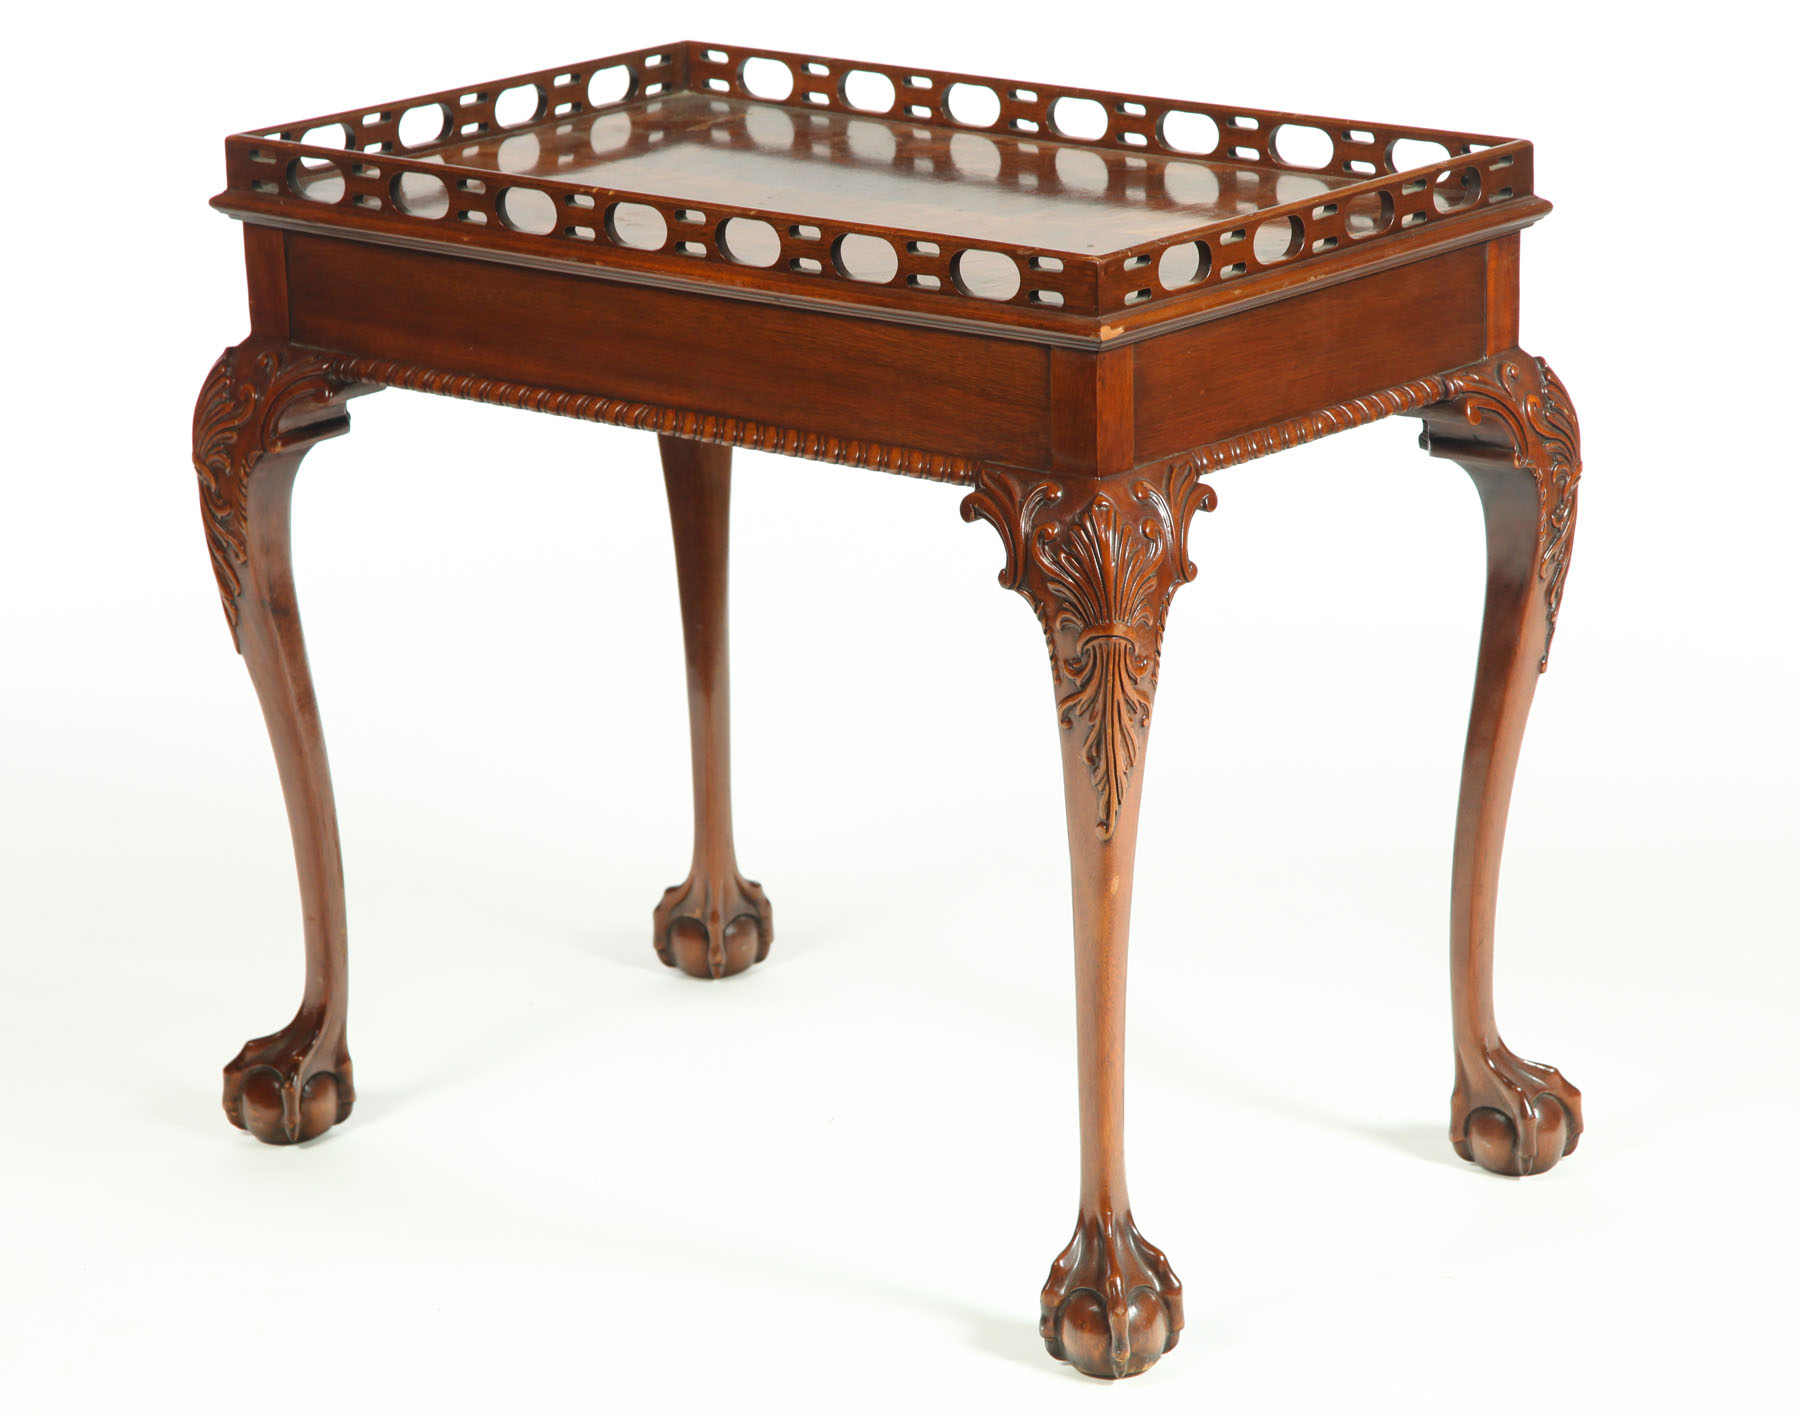 CHIPPENDALE-STYLE TEA TABLE.  Council